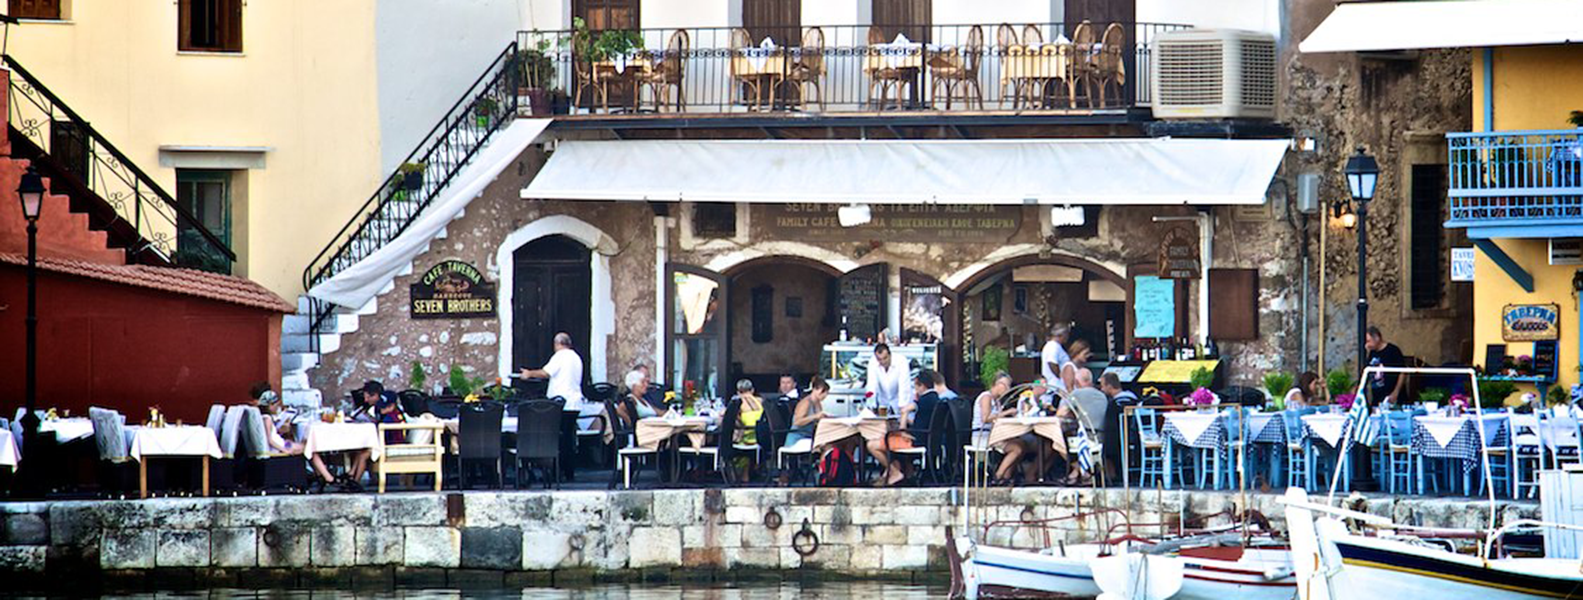 SB Restaurant - Α traditional tavern in a picturesque old harbor